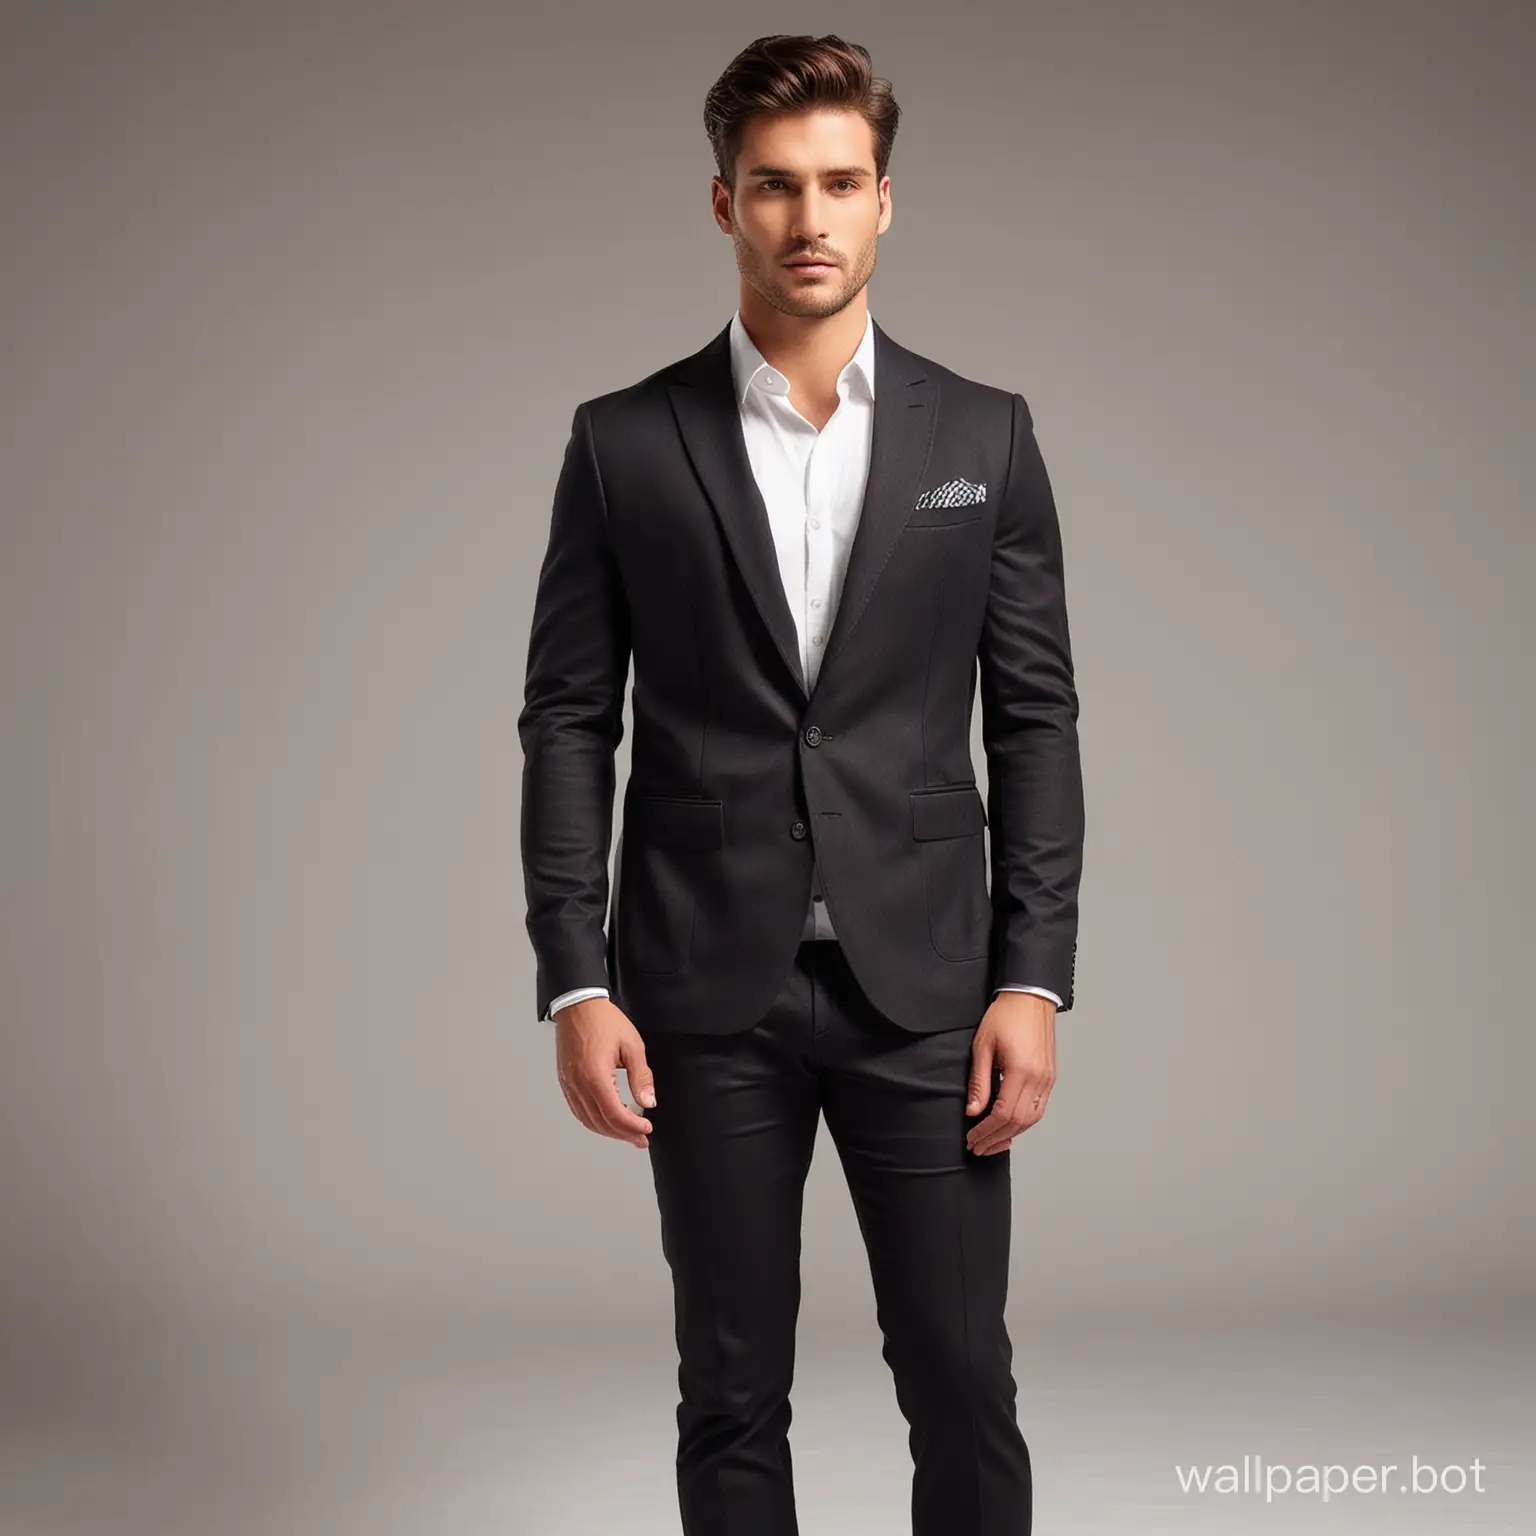 Fashionable-Male-Model-in-Latest-Trending-Clothing